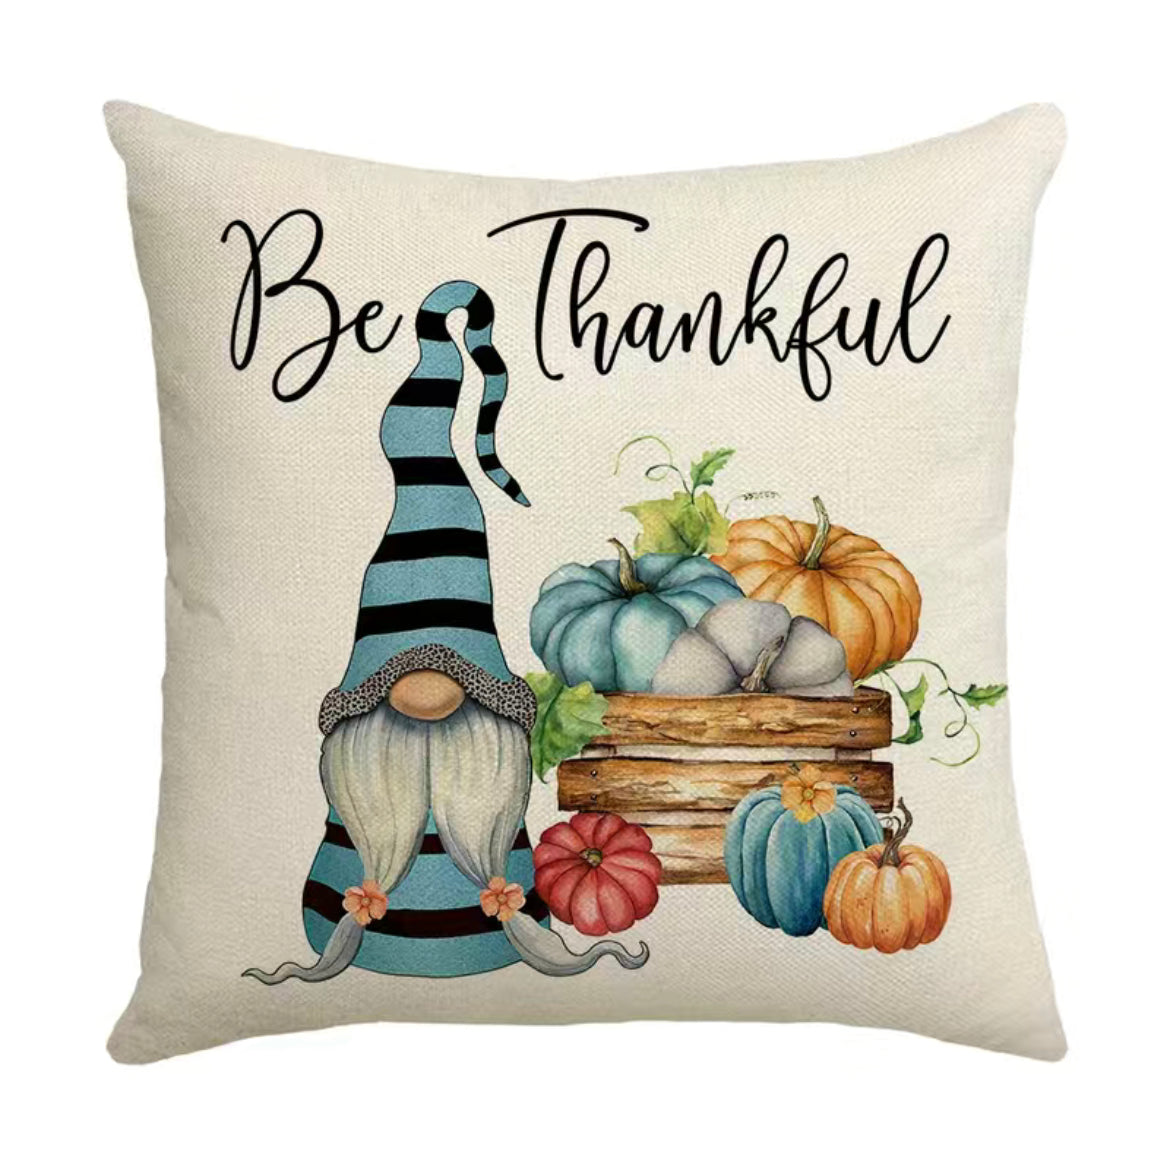 Be Thankful Gnome Linen Cushion Cover, Nordic, Gonk, Swedish Tomte